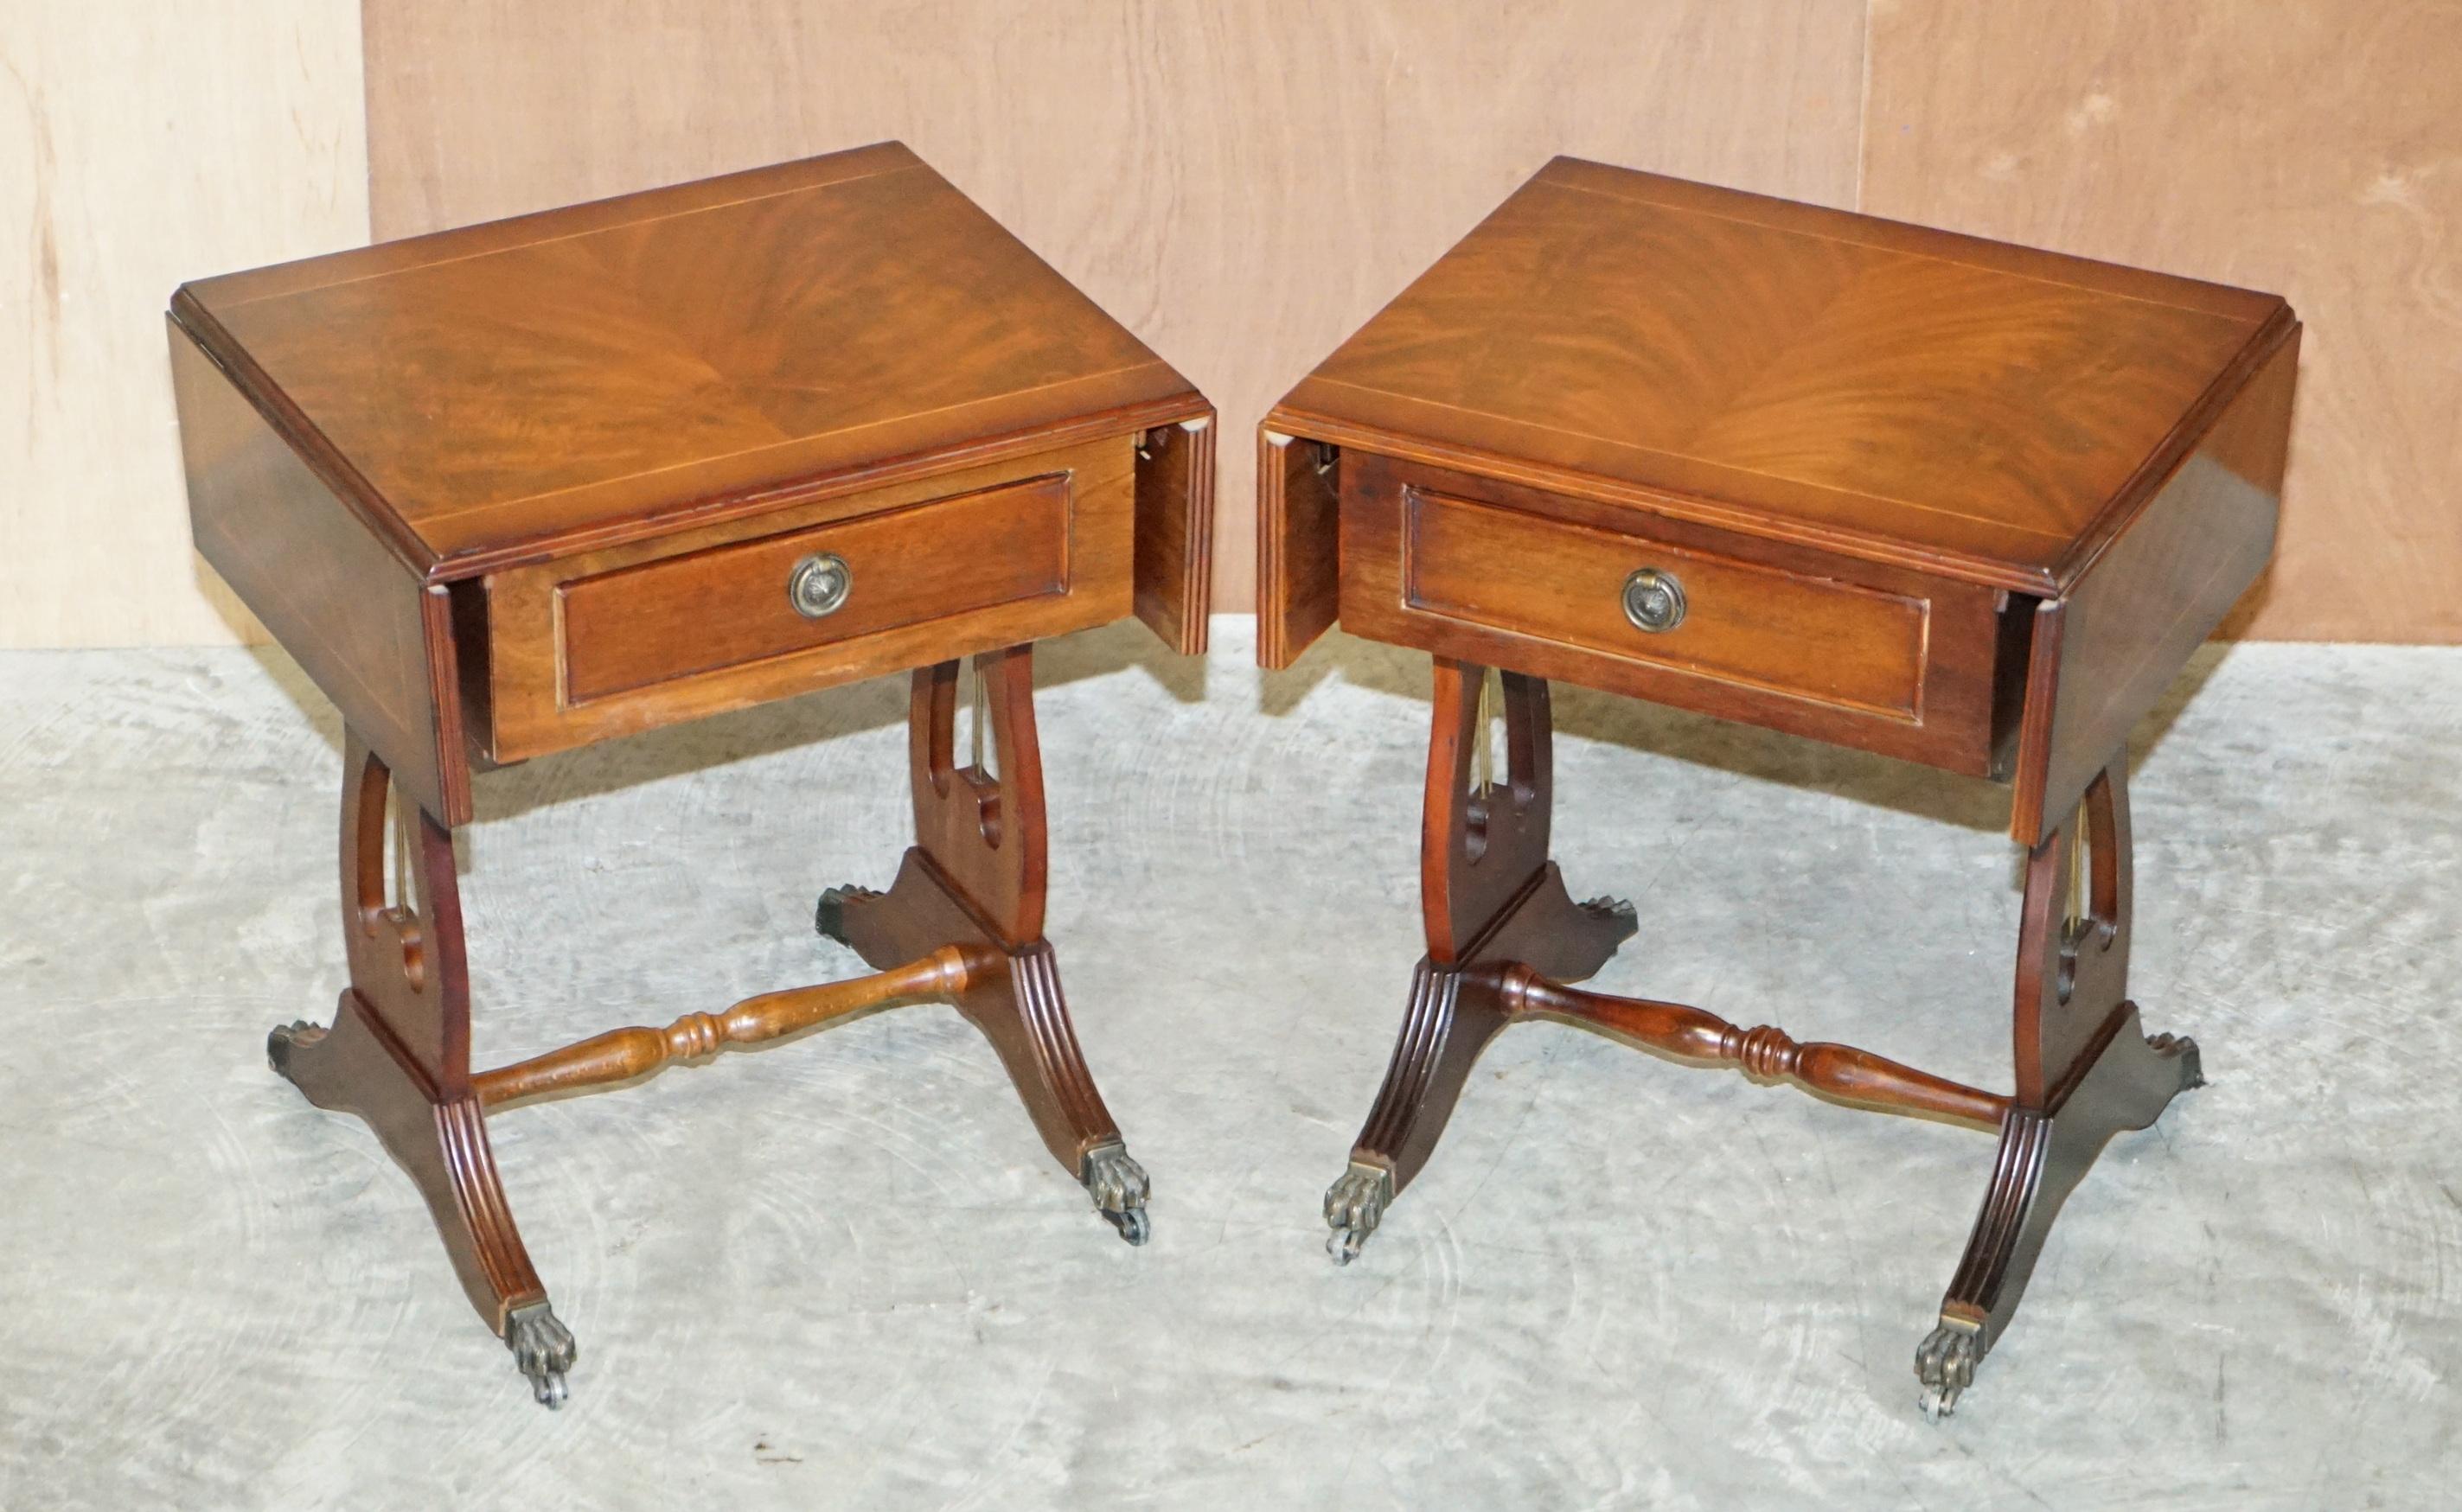 We are delighted to offer for sale this lovely pair of Bevan Funnell flamed Mahogany side tables with extending top and single drawers 

A very good looking and utilitarian pair, the tables have good sized single drawers to the front, the top